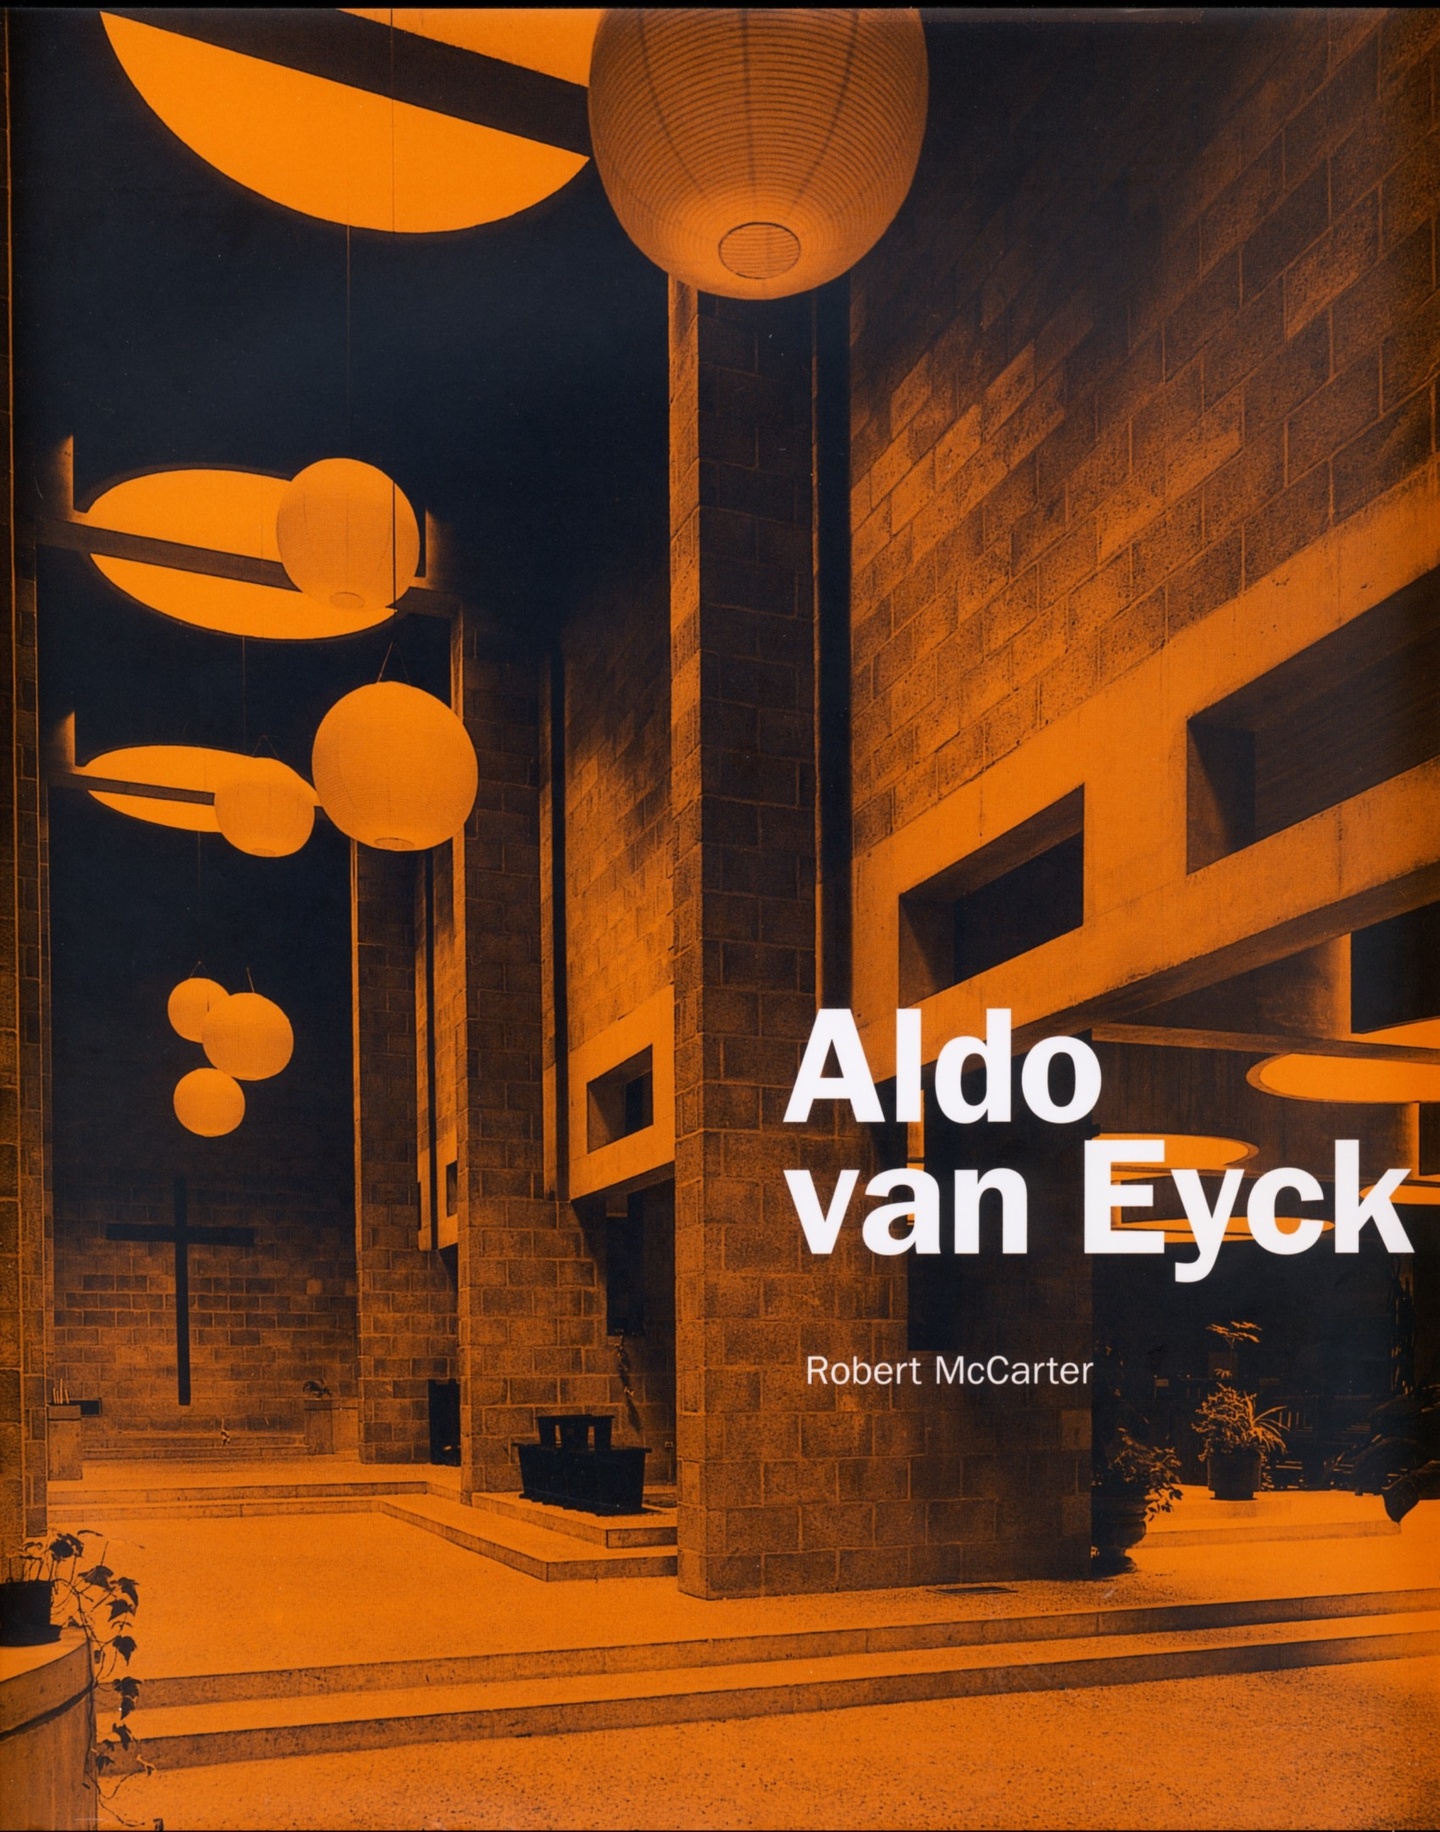 Cover of Aldo van Eyck, with a two-tone orange and black photo of the interior of a building with impressive columns and globe lights hanging down from the ceiling at different heights.